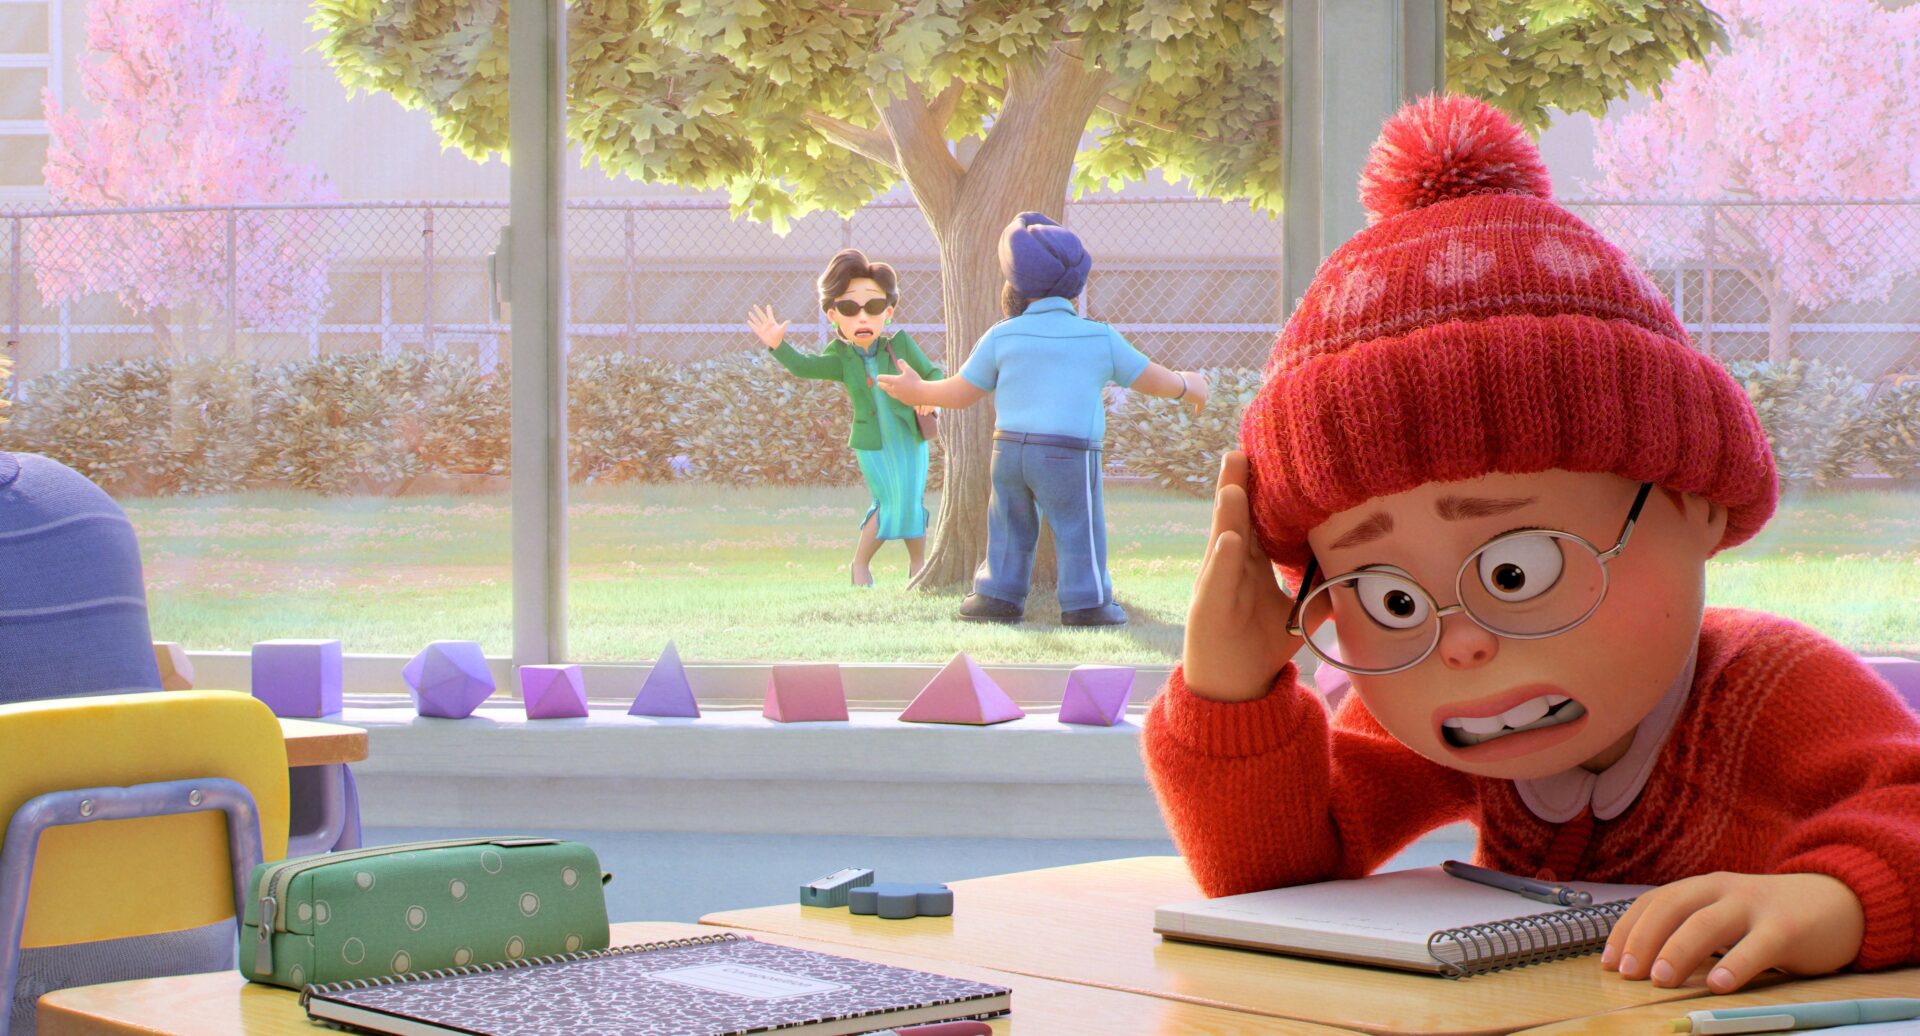 Turning Red is Pixar's latest film aiming to destigmatise periods and  remove the shame around menstruation for young women